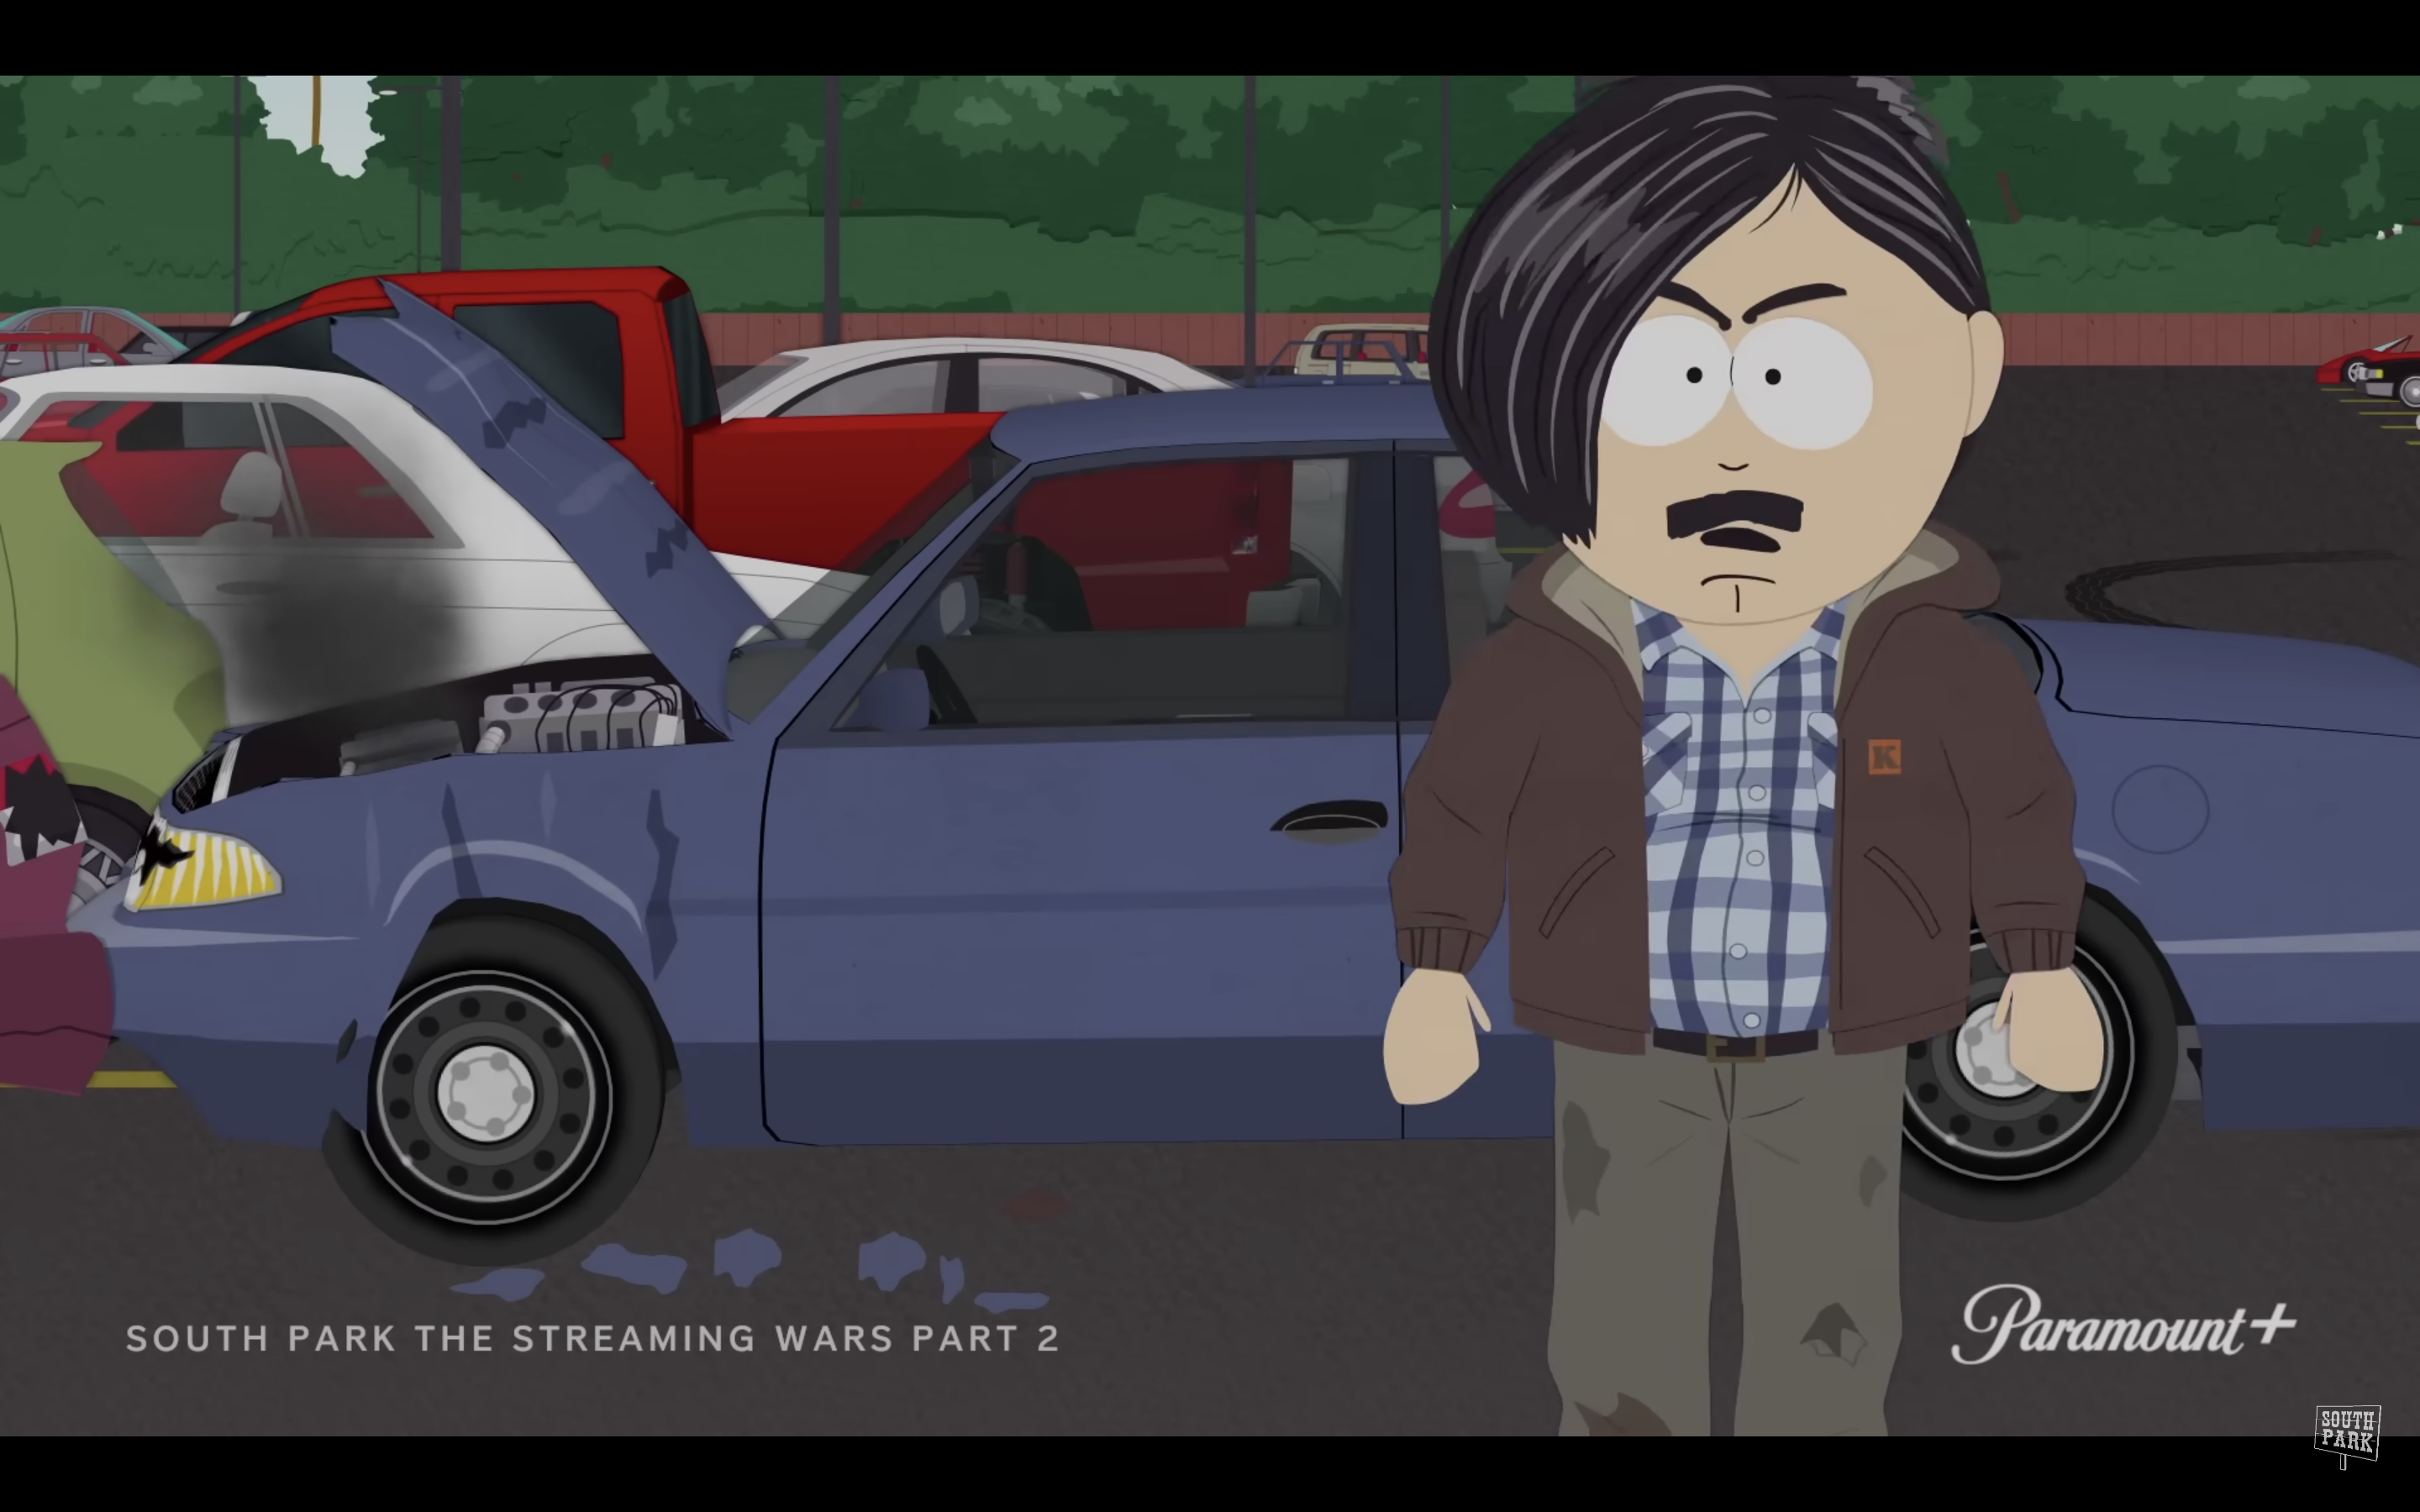 South Park: The Streaming Wars Part 2 Drops July 13 on Paramount+